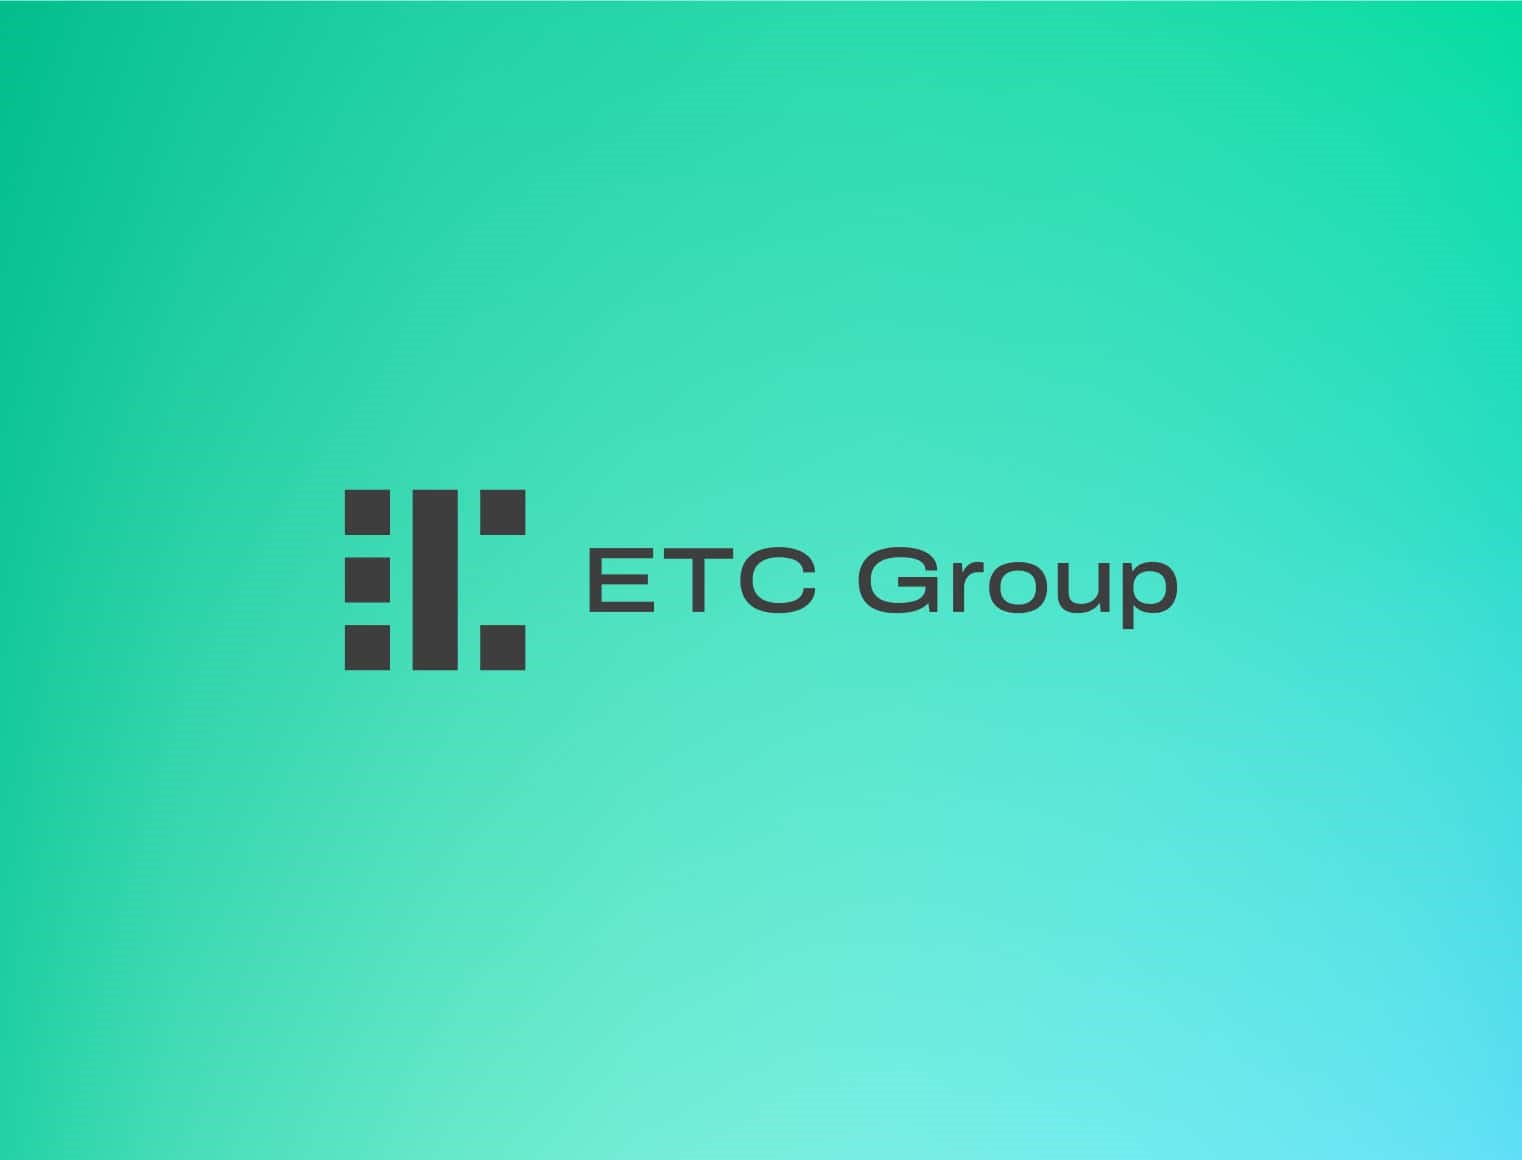 ETC Group Crypto Market Compass #25 2024 Last week, cryptoassets underperformed traditional assets as risks to global growth are increasing